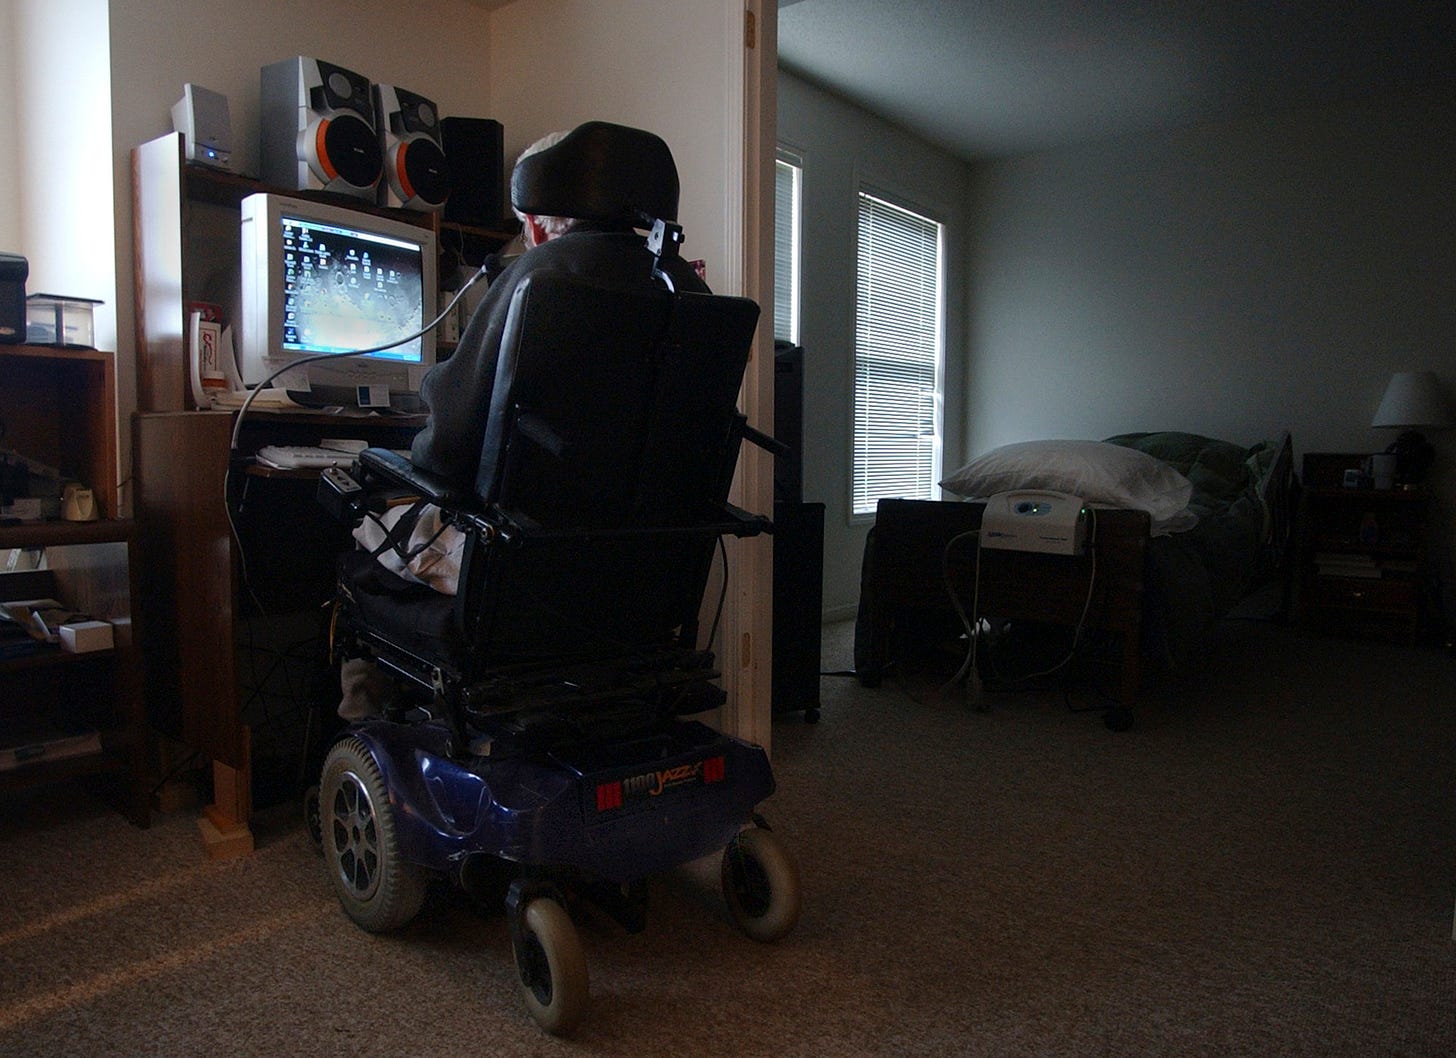 In a dark apartment, we see a motorized wheelchair, the man in it just visible, sitting at a computer.